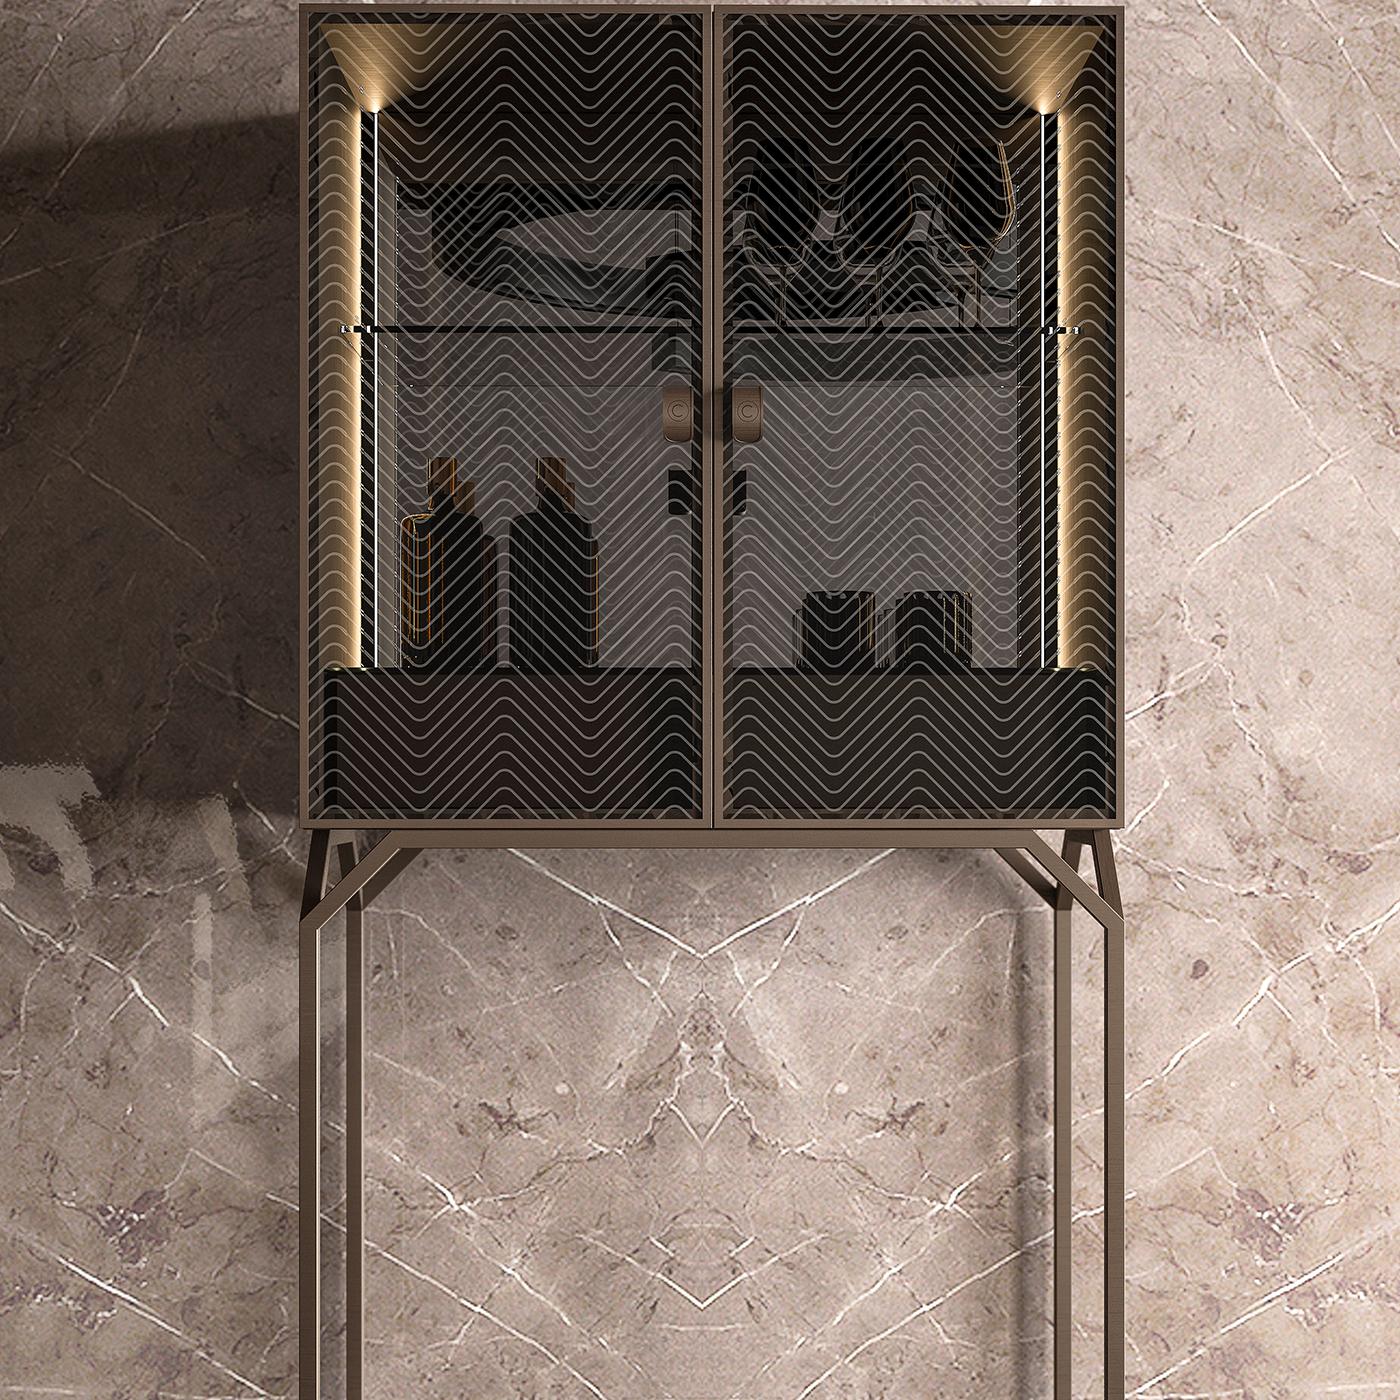 As if straight from the Great Gatsby, the glass bar cabinet features a Cipriani signature zig-zag engraving on its two front doors. On a slim metal base, the cabinet conceals two shelves and a spacious bottom area to display your best bottles with